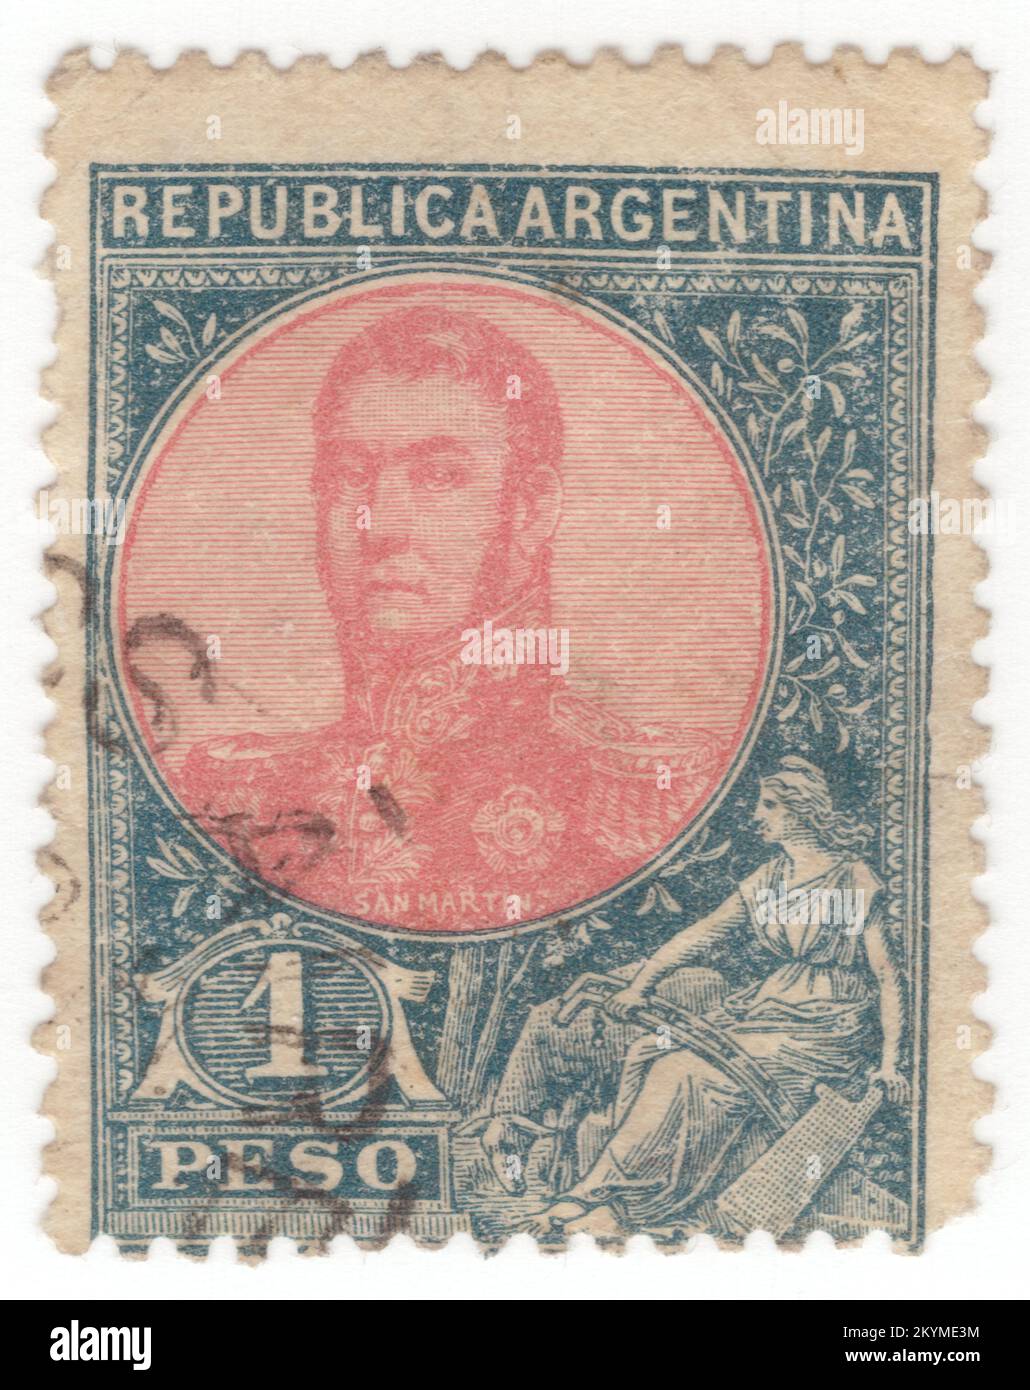 ARGENTINA - 1908: 1 peso slate-blue and pink postage stamp depicting portrait of José de San Martín (Jose Francisco de San Martín y Matorras), known as the Liberator of Argentina, Chile and Peru. Argentine general and the primary leader of the southern and central parts of South America's successful struggle for independence from the Spanish Empire who served as the Protector of Peru. Born in Yapeyú, Corrientes, in modern-day Argentina, he left the Viceroyalty of the Río de la Plata at the early age of seven to study in Málaga, Spain Stock Photo